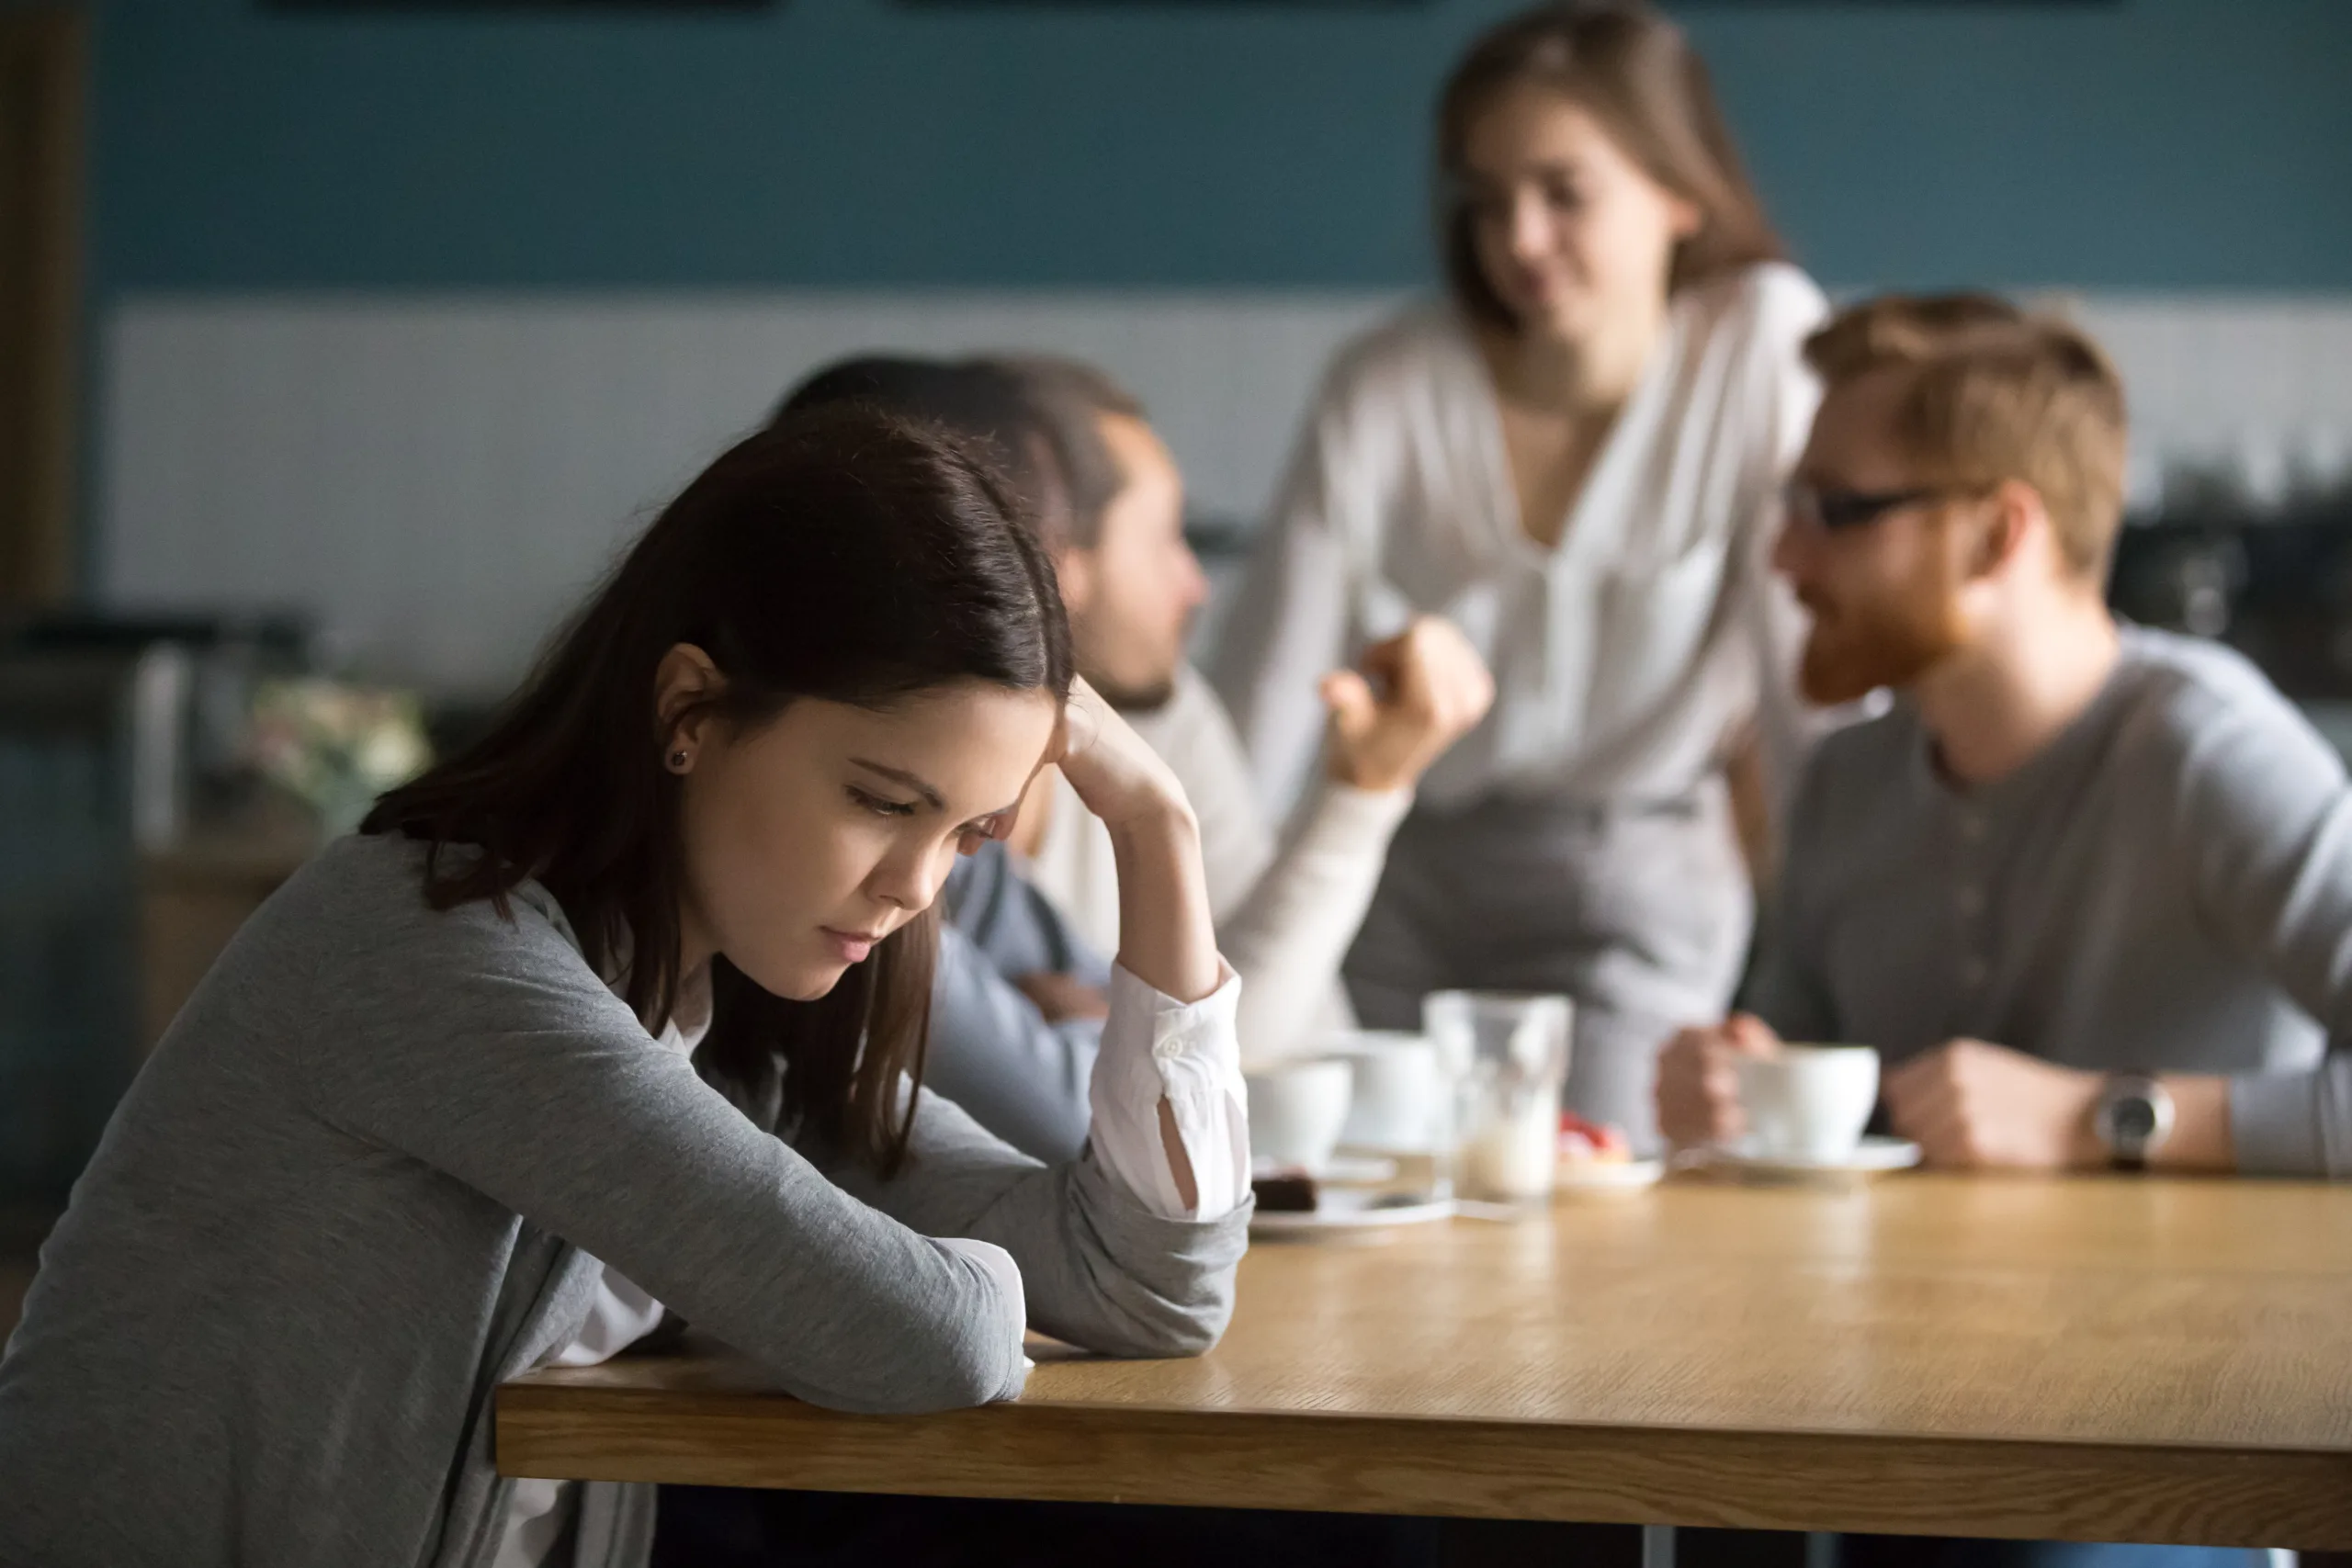 Upset young girl sit alone at coffee table in cafÃ© feeling lonely or offended, sad female loner avoid talking to people, student outsider suffer from discrimination, lacking friends or company